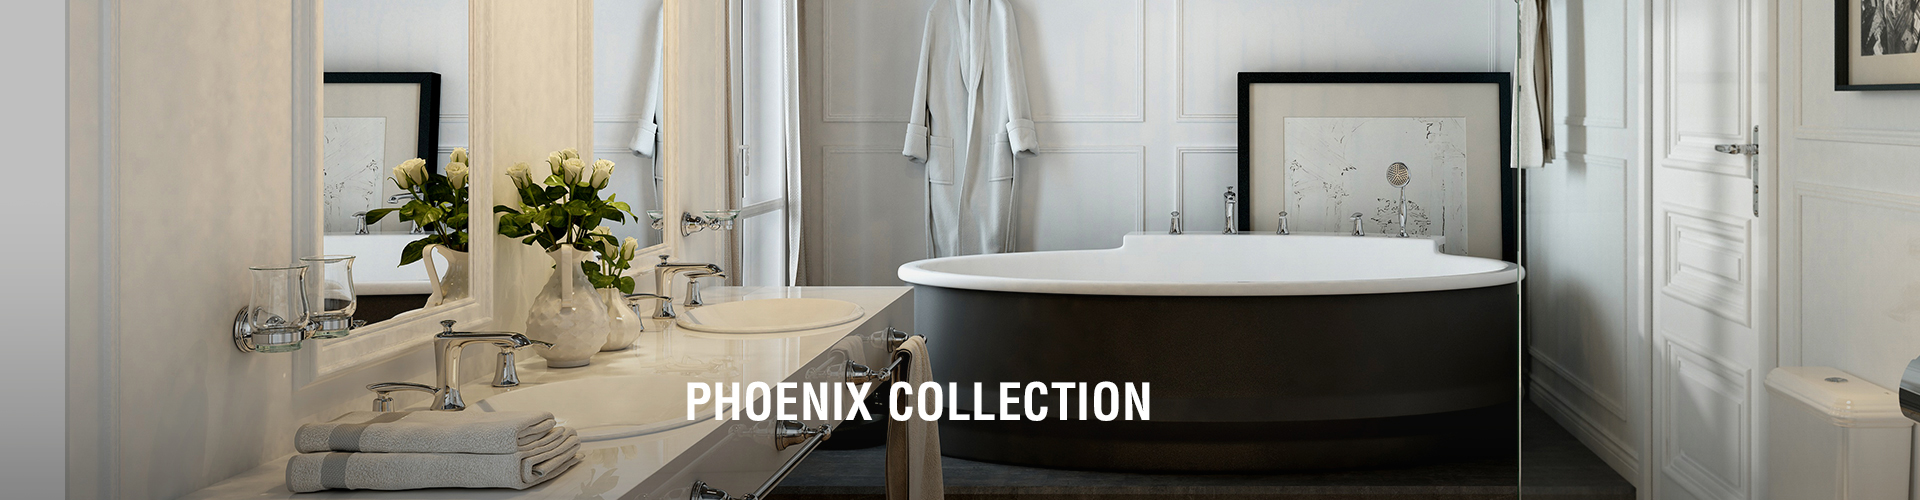 Combination of classic and modern design-Phoenix Chrome Series